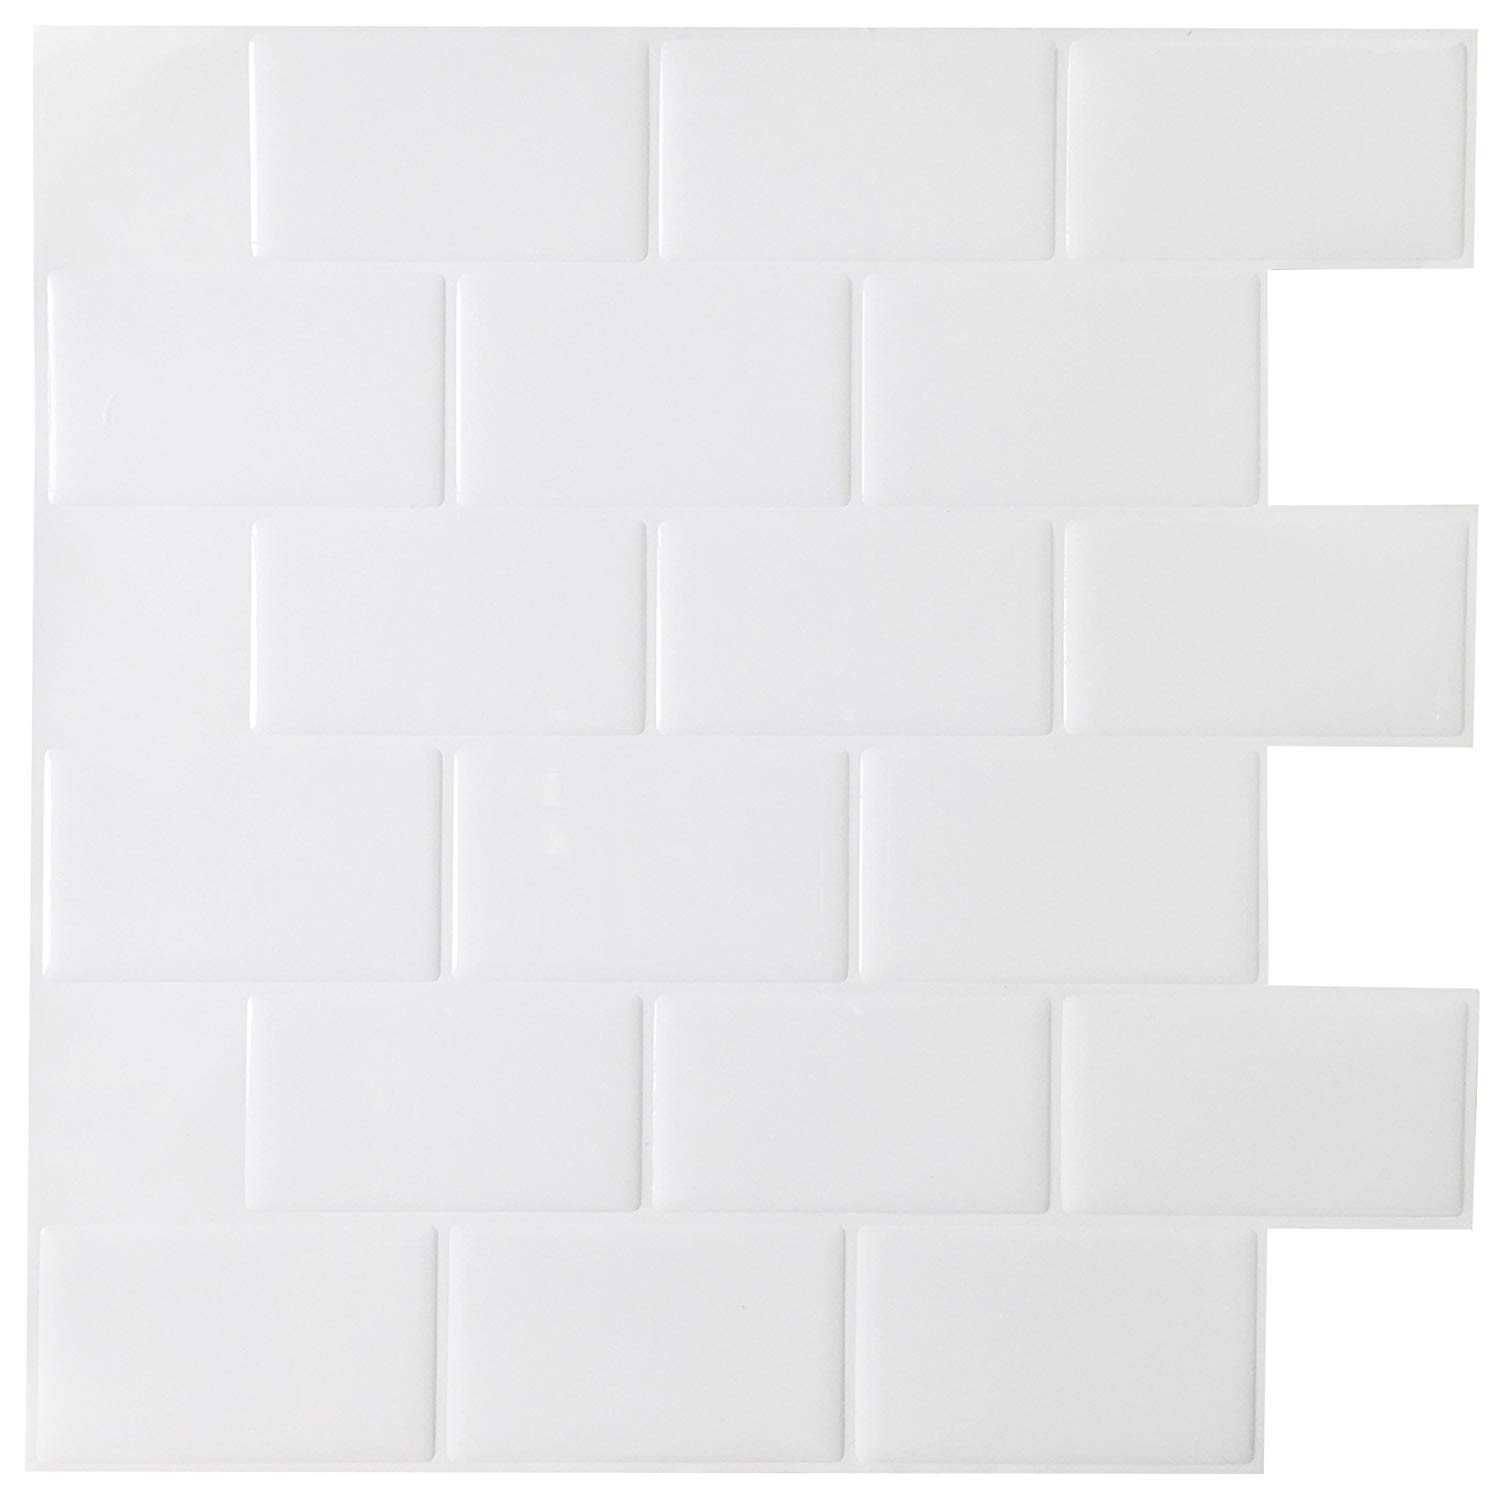 A17000P20 --20 Sheet Peel and stick backsplash tiles for kitchen, 12''x12'' in white